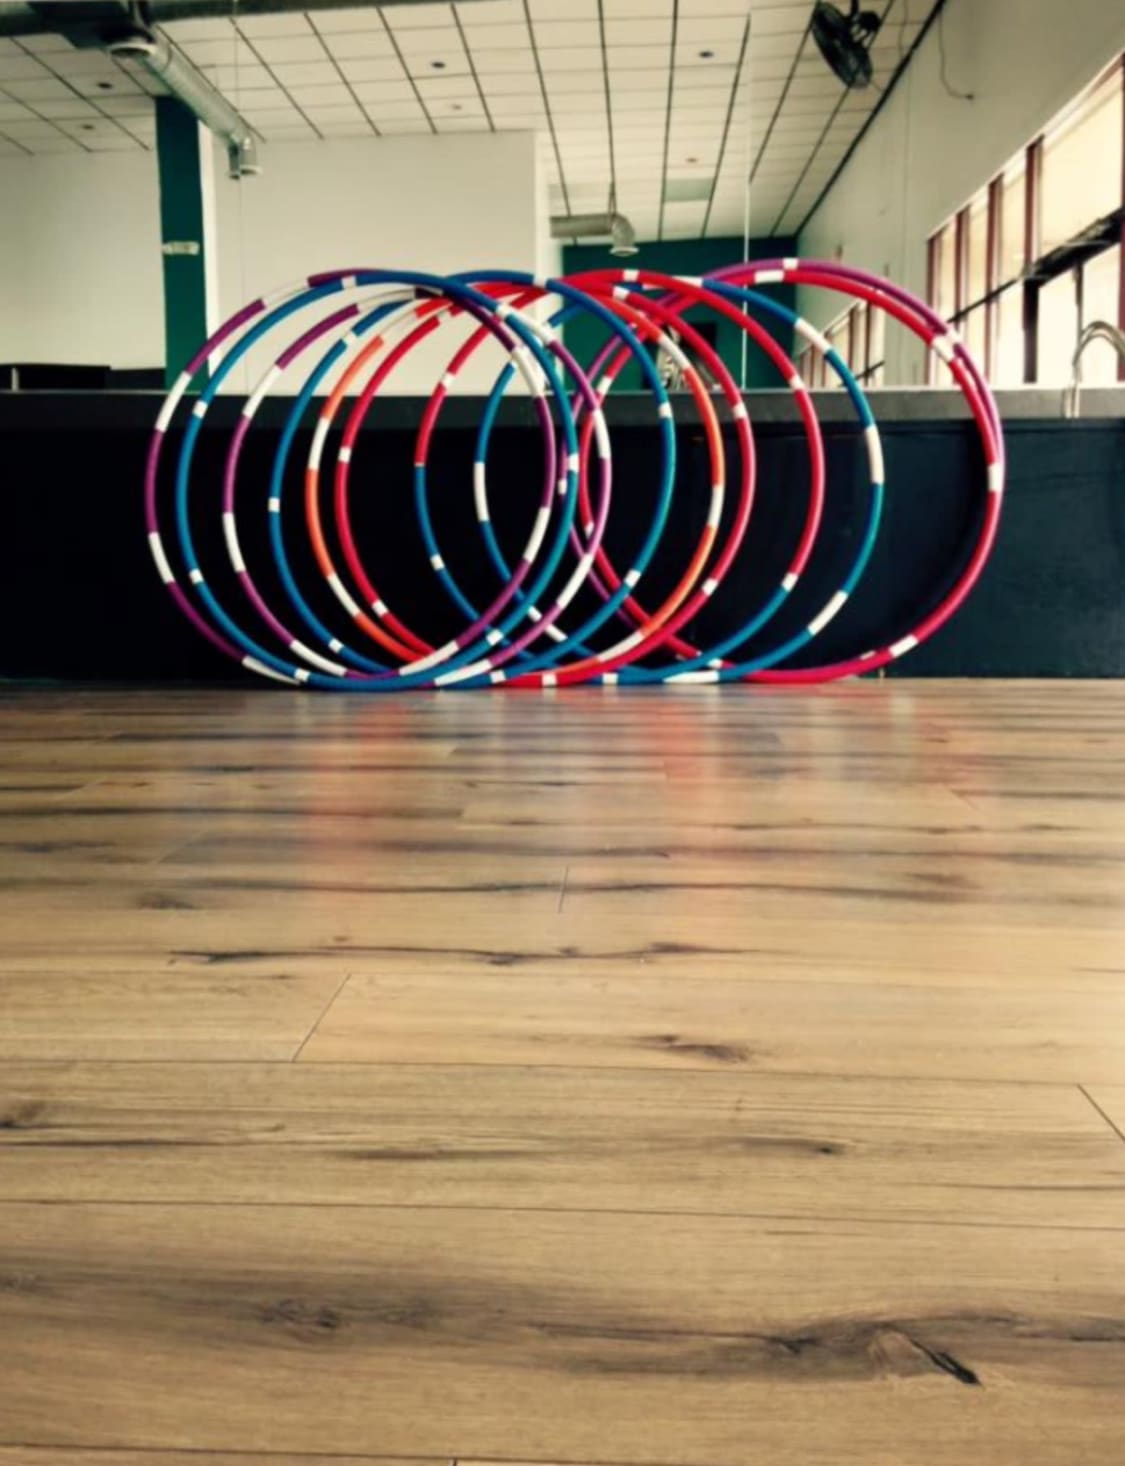 HulaFit® - Bring your Core to the Floor for our hip shakin' Hula Hoop class!